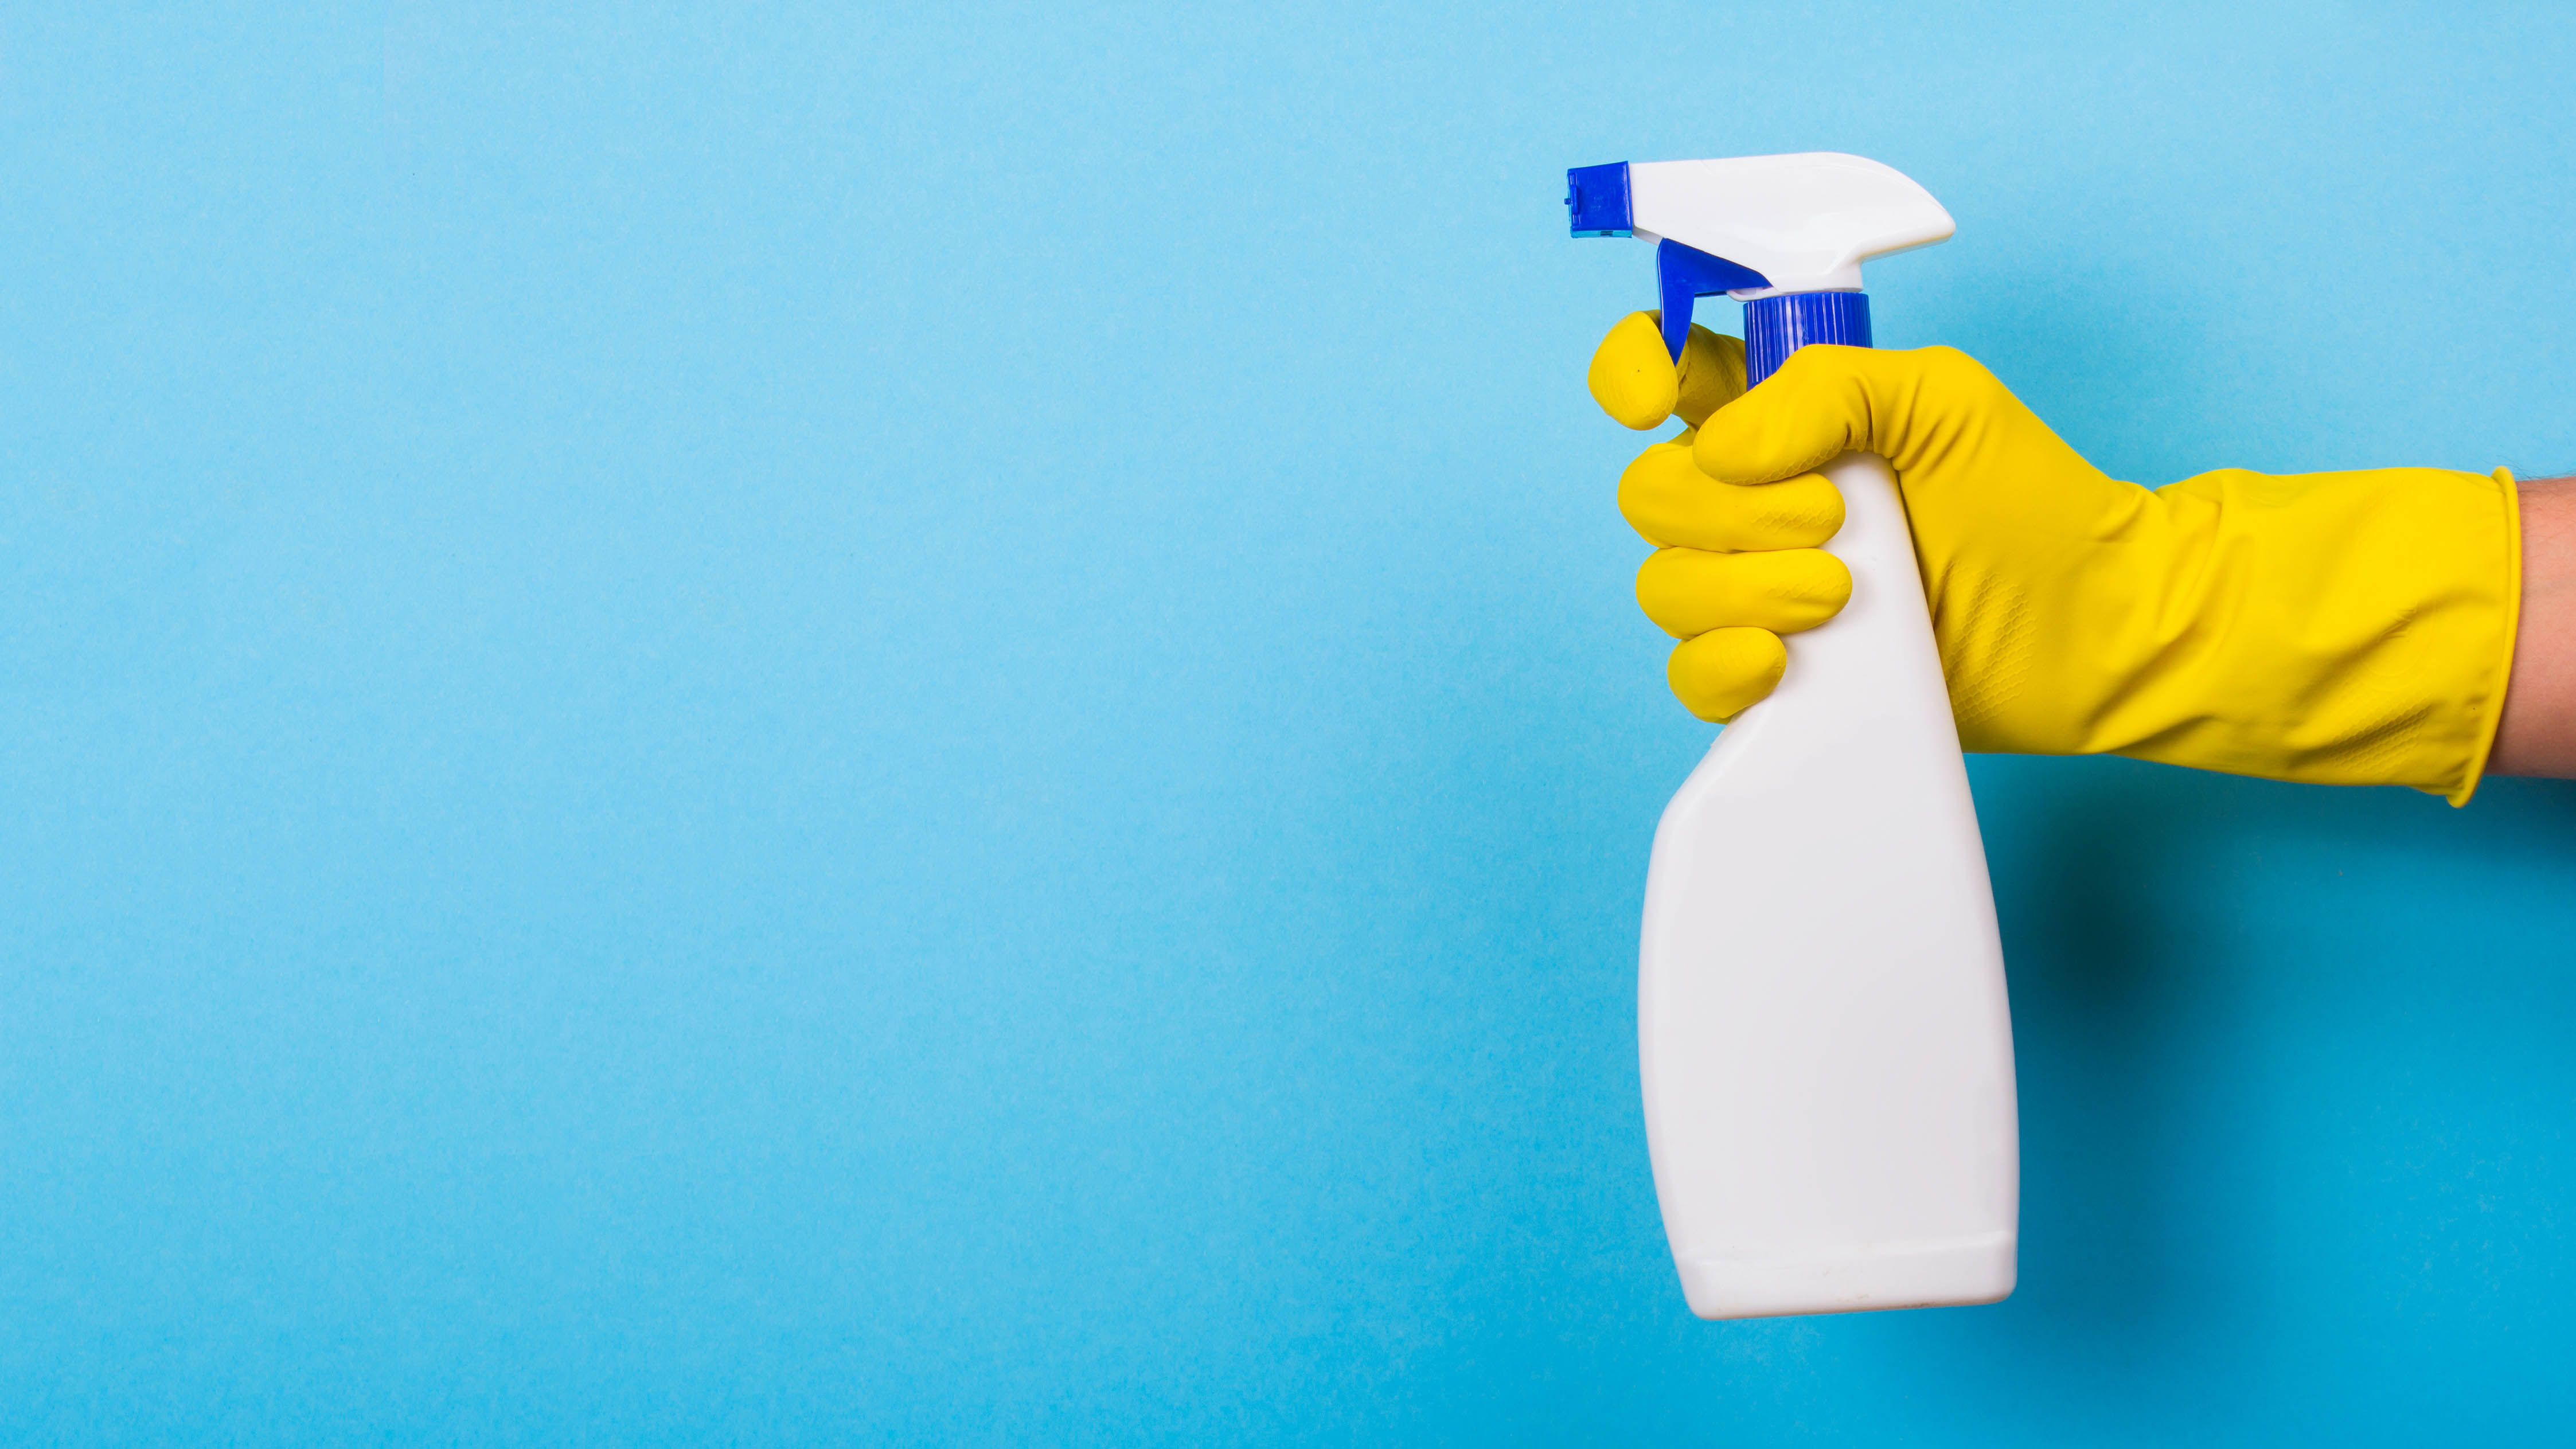 An unlabeled spray bottle being held by a gloved hand on a blue background